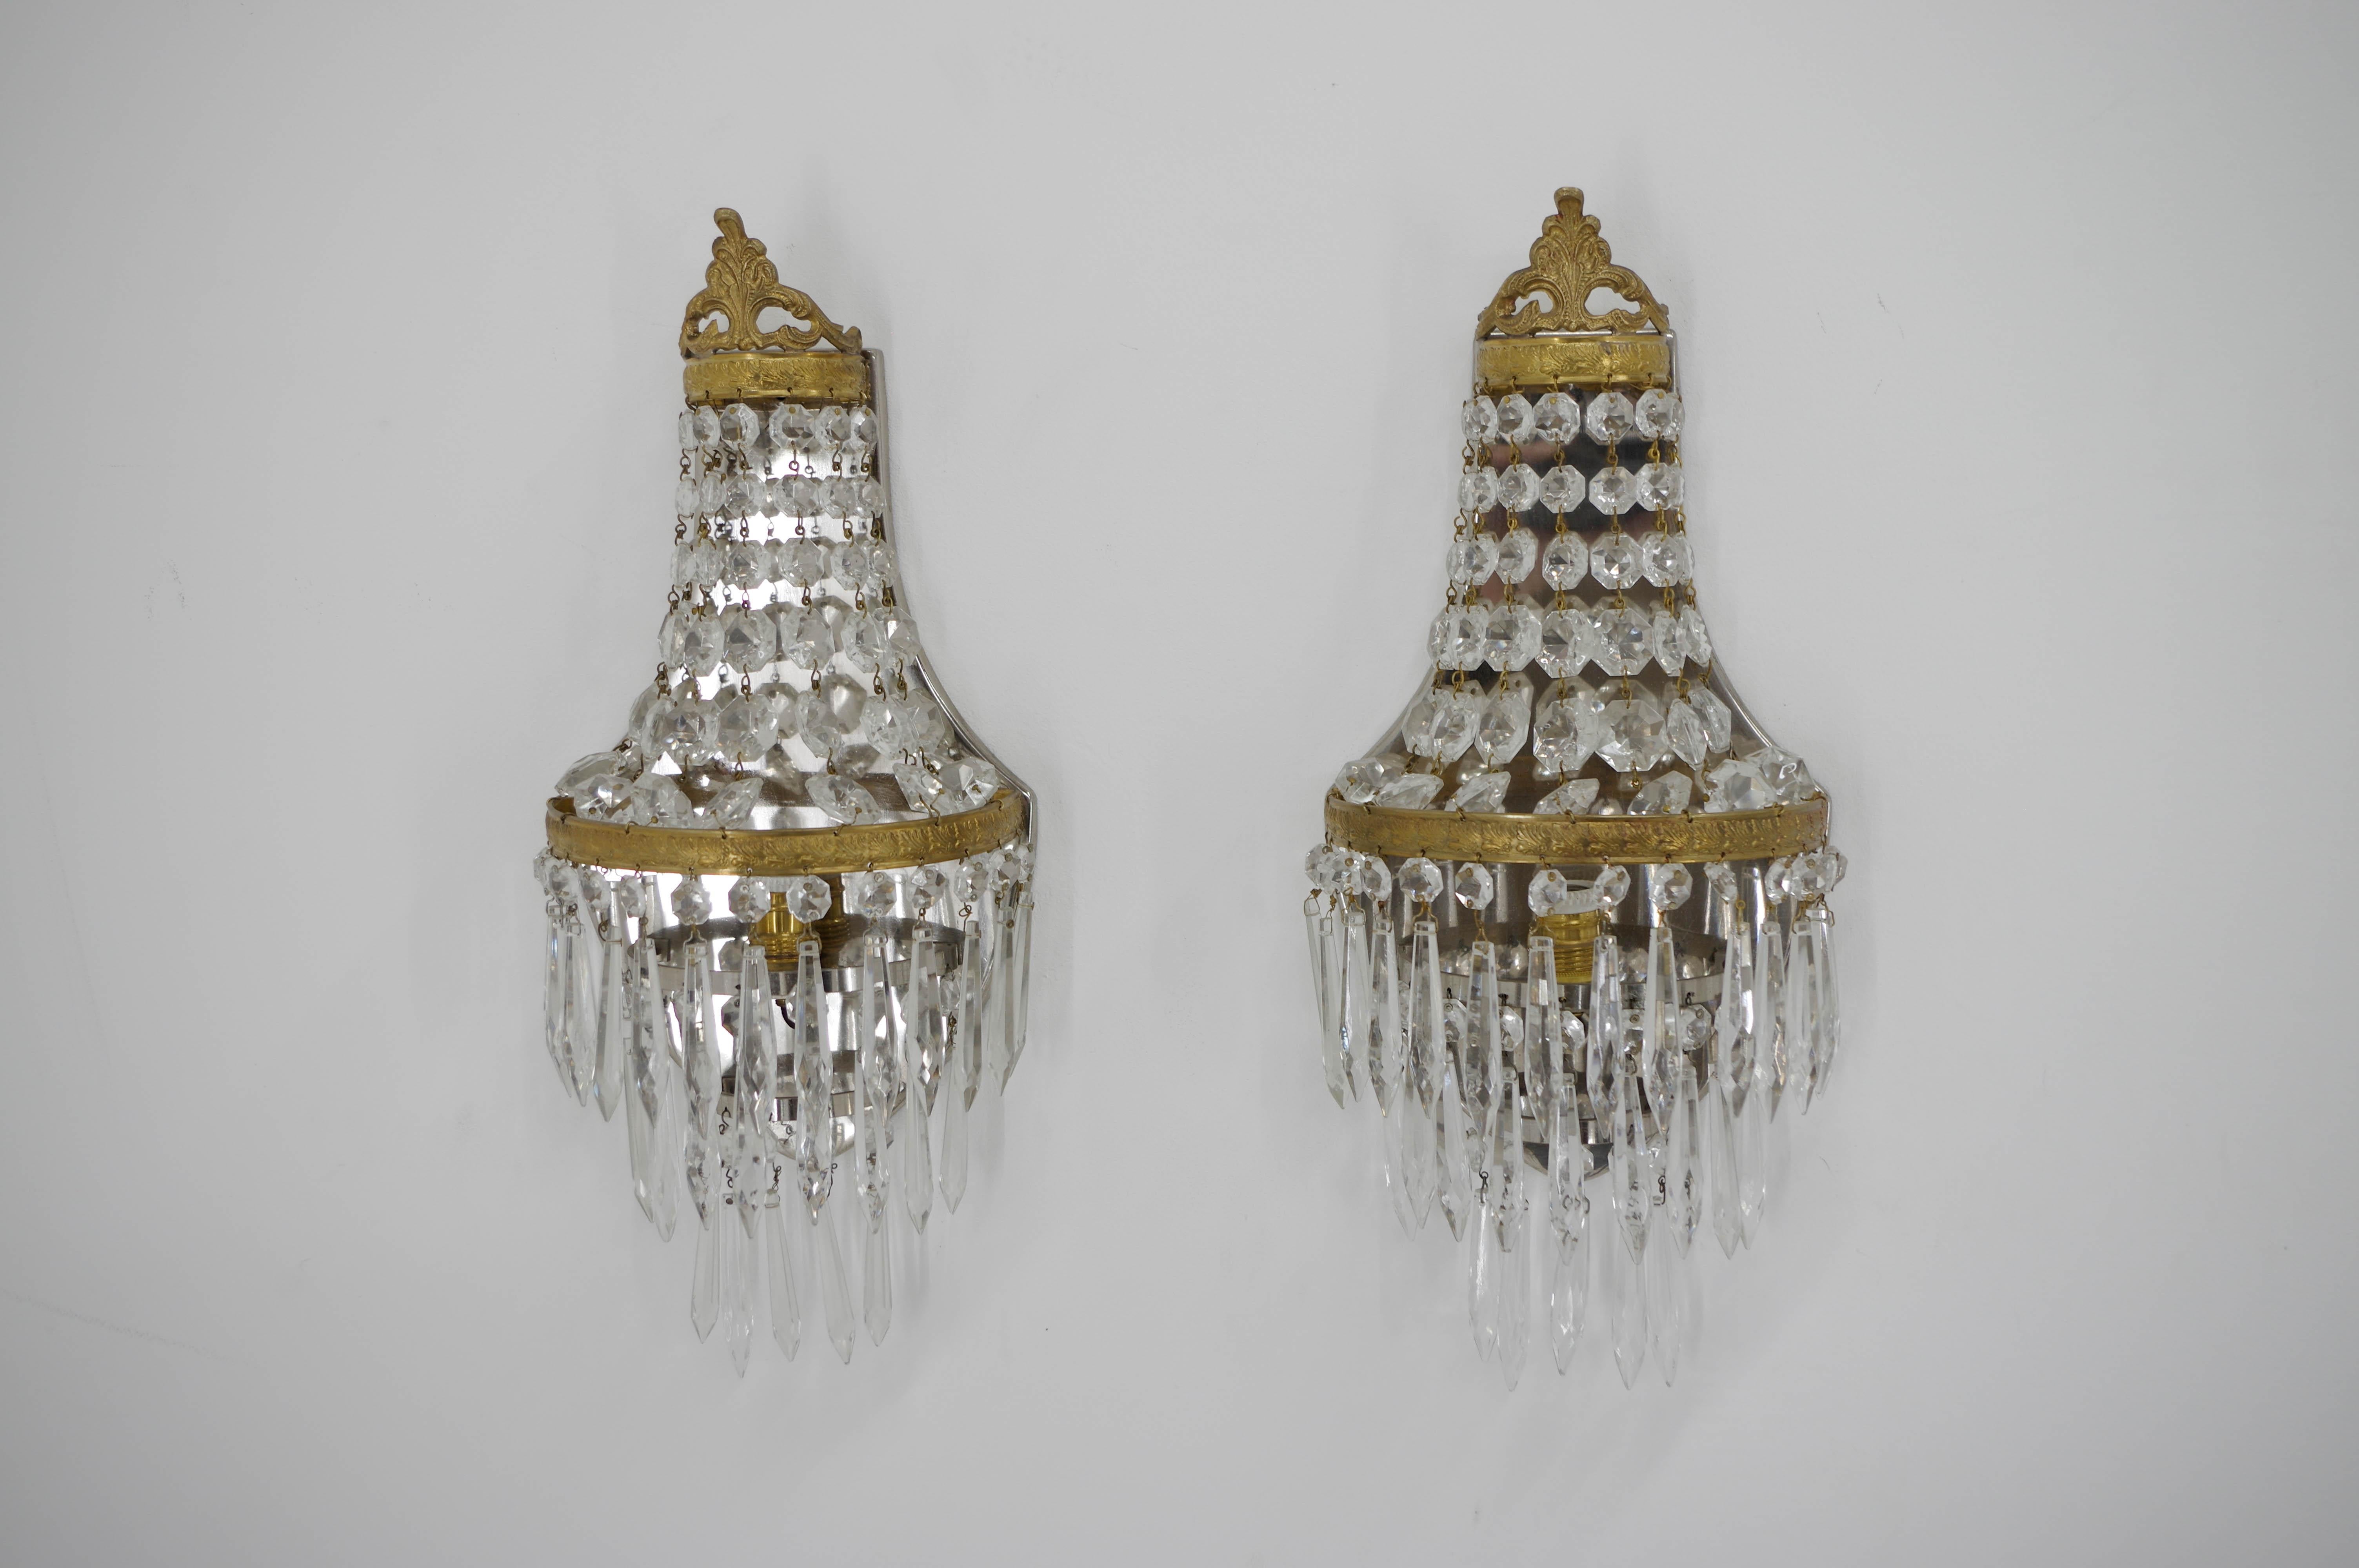 Set of two wall lamps made of brass and crystal.
Restored: cleaned, rewired
1x40W, E12-E14 bulbs
US wiring compatible